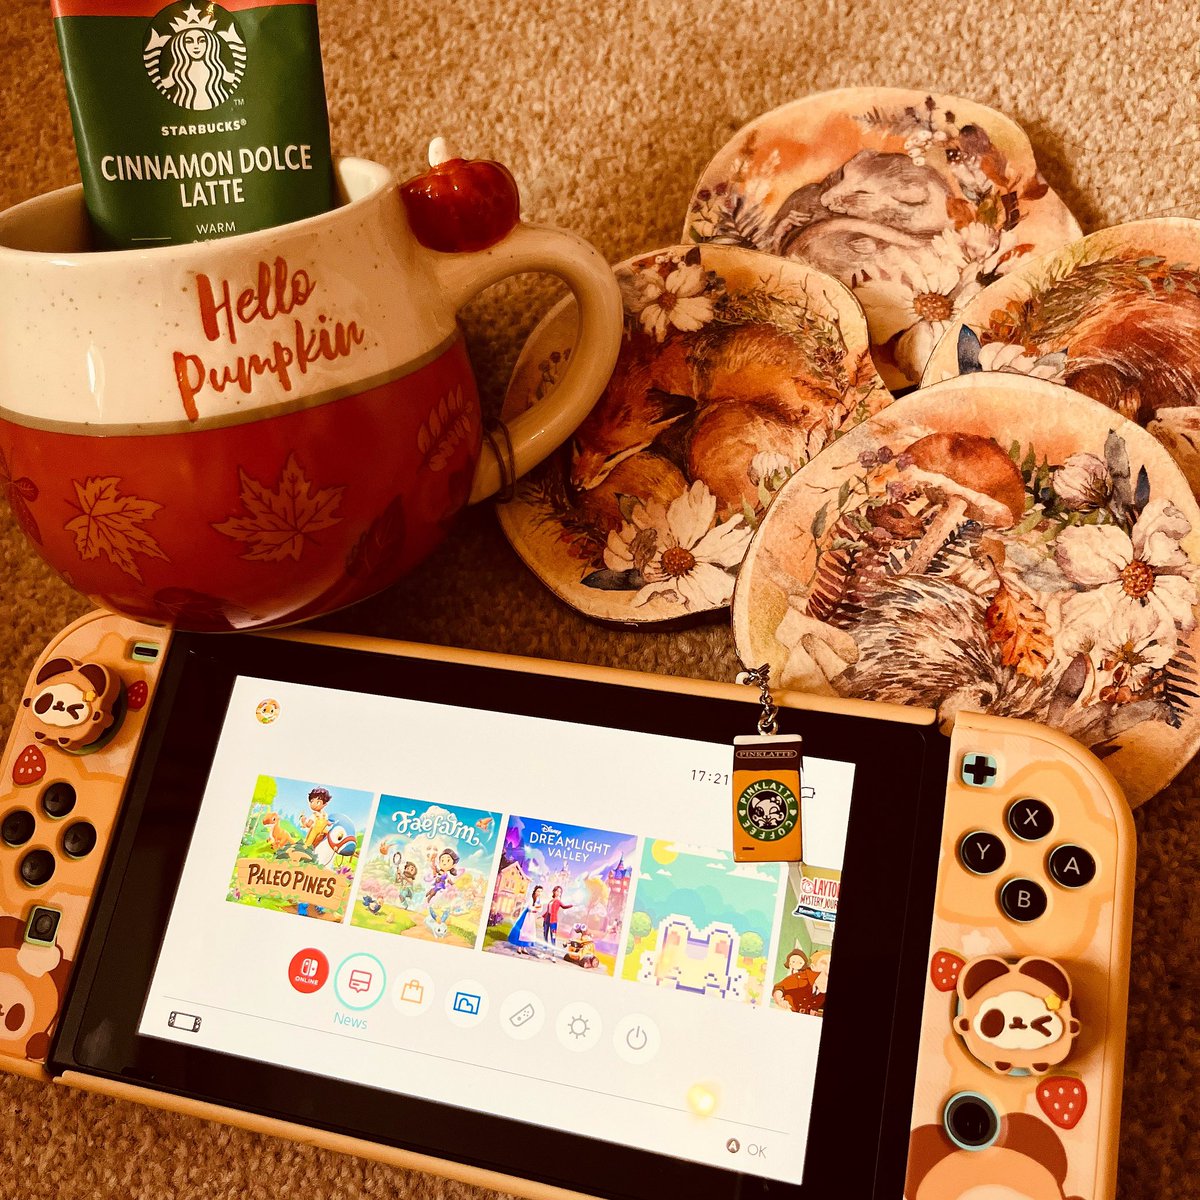 I’m so happy it’s Friday 🥹

We’ve made it through another week guys! It’s not long till we can get all cosy in bed with a festive hot drink and catch up on our ever growing gaming backlogs ☕️🎮🙈

What’s your current go to game? 
#cosygaming #indiegames